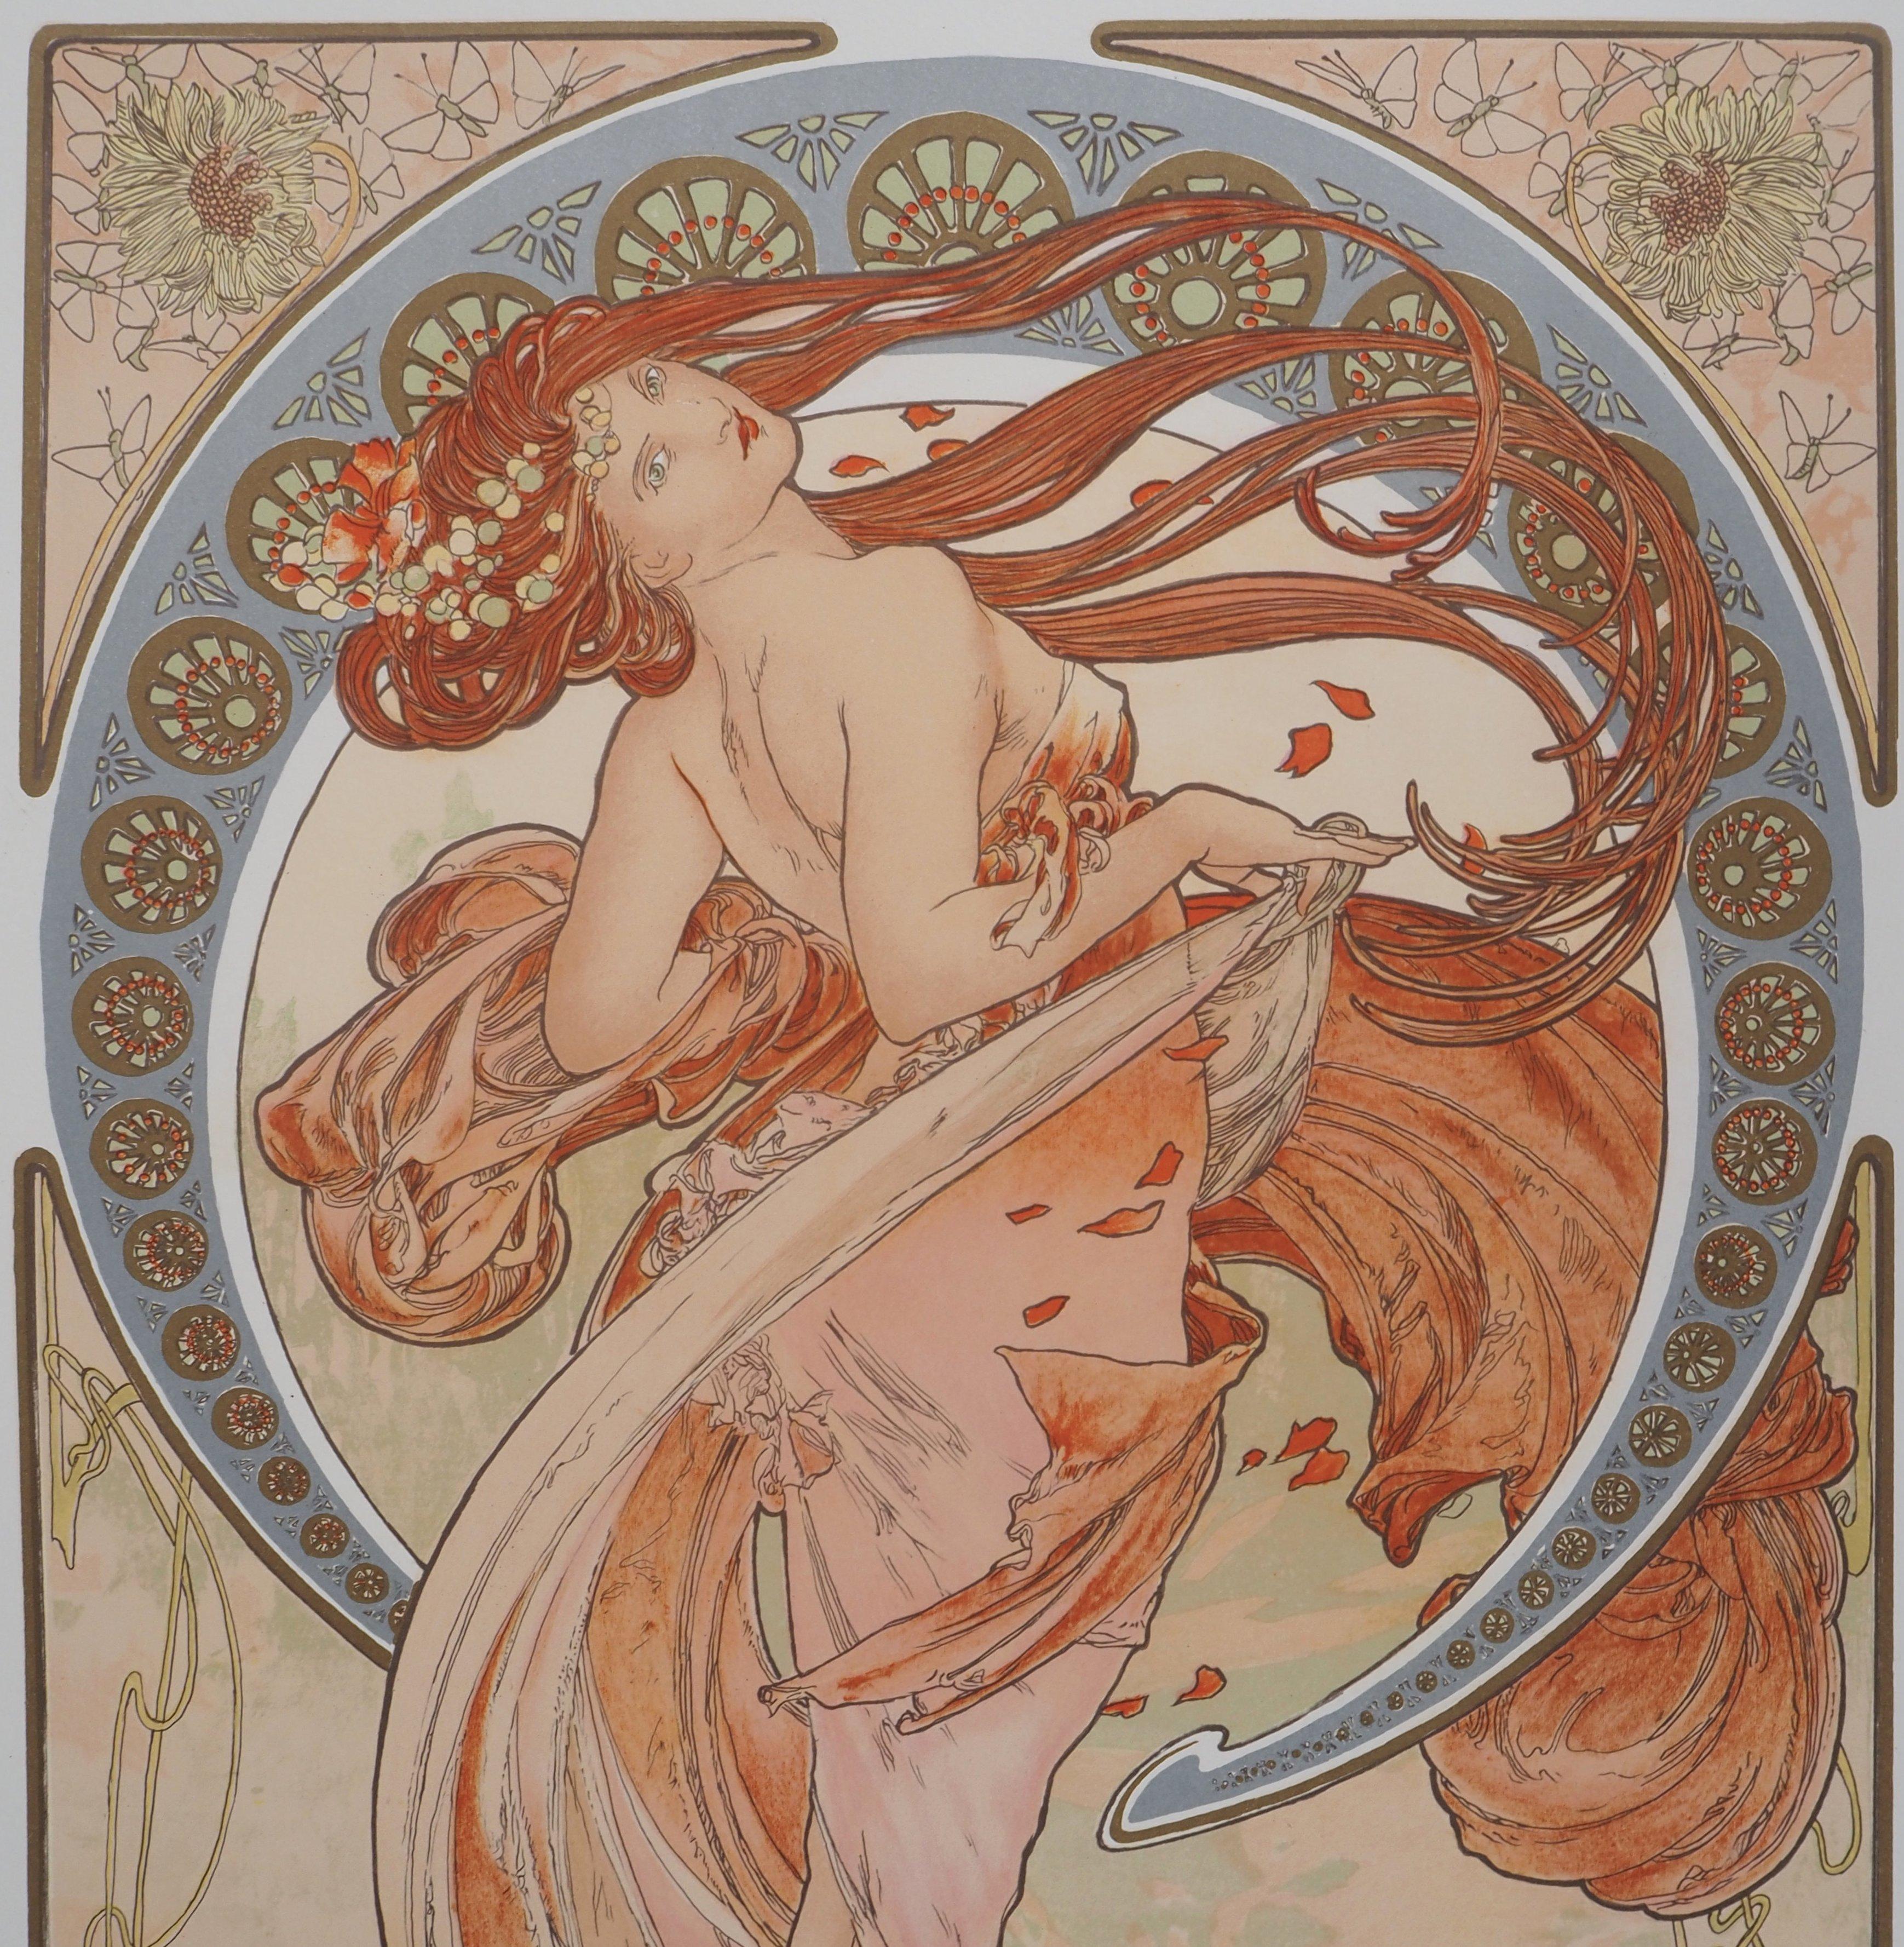 Alphonse MUCHA (1860-1939) (after)
The Arts : The Dance

Lithograph
Printed signature in the plate
Numbered / 500
Published in 